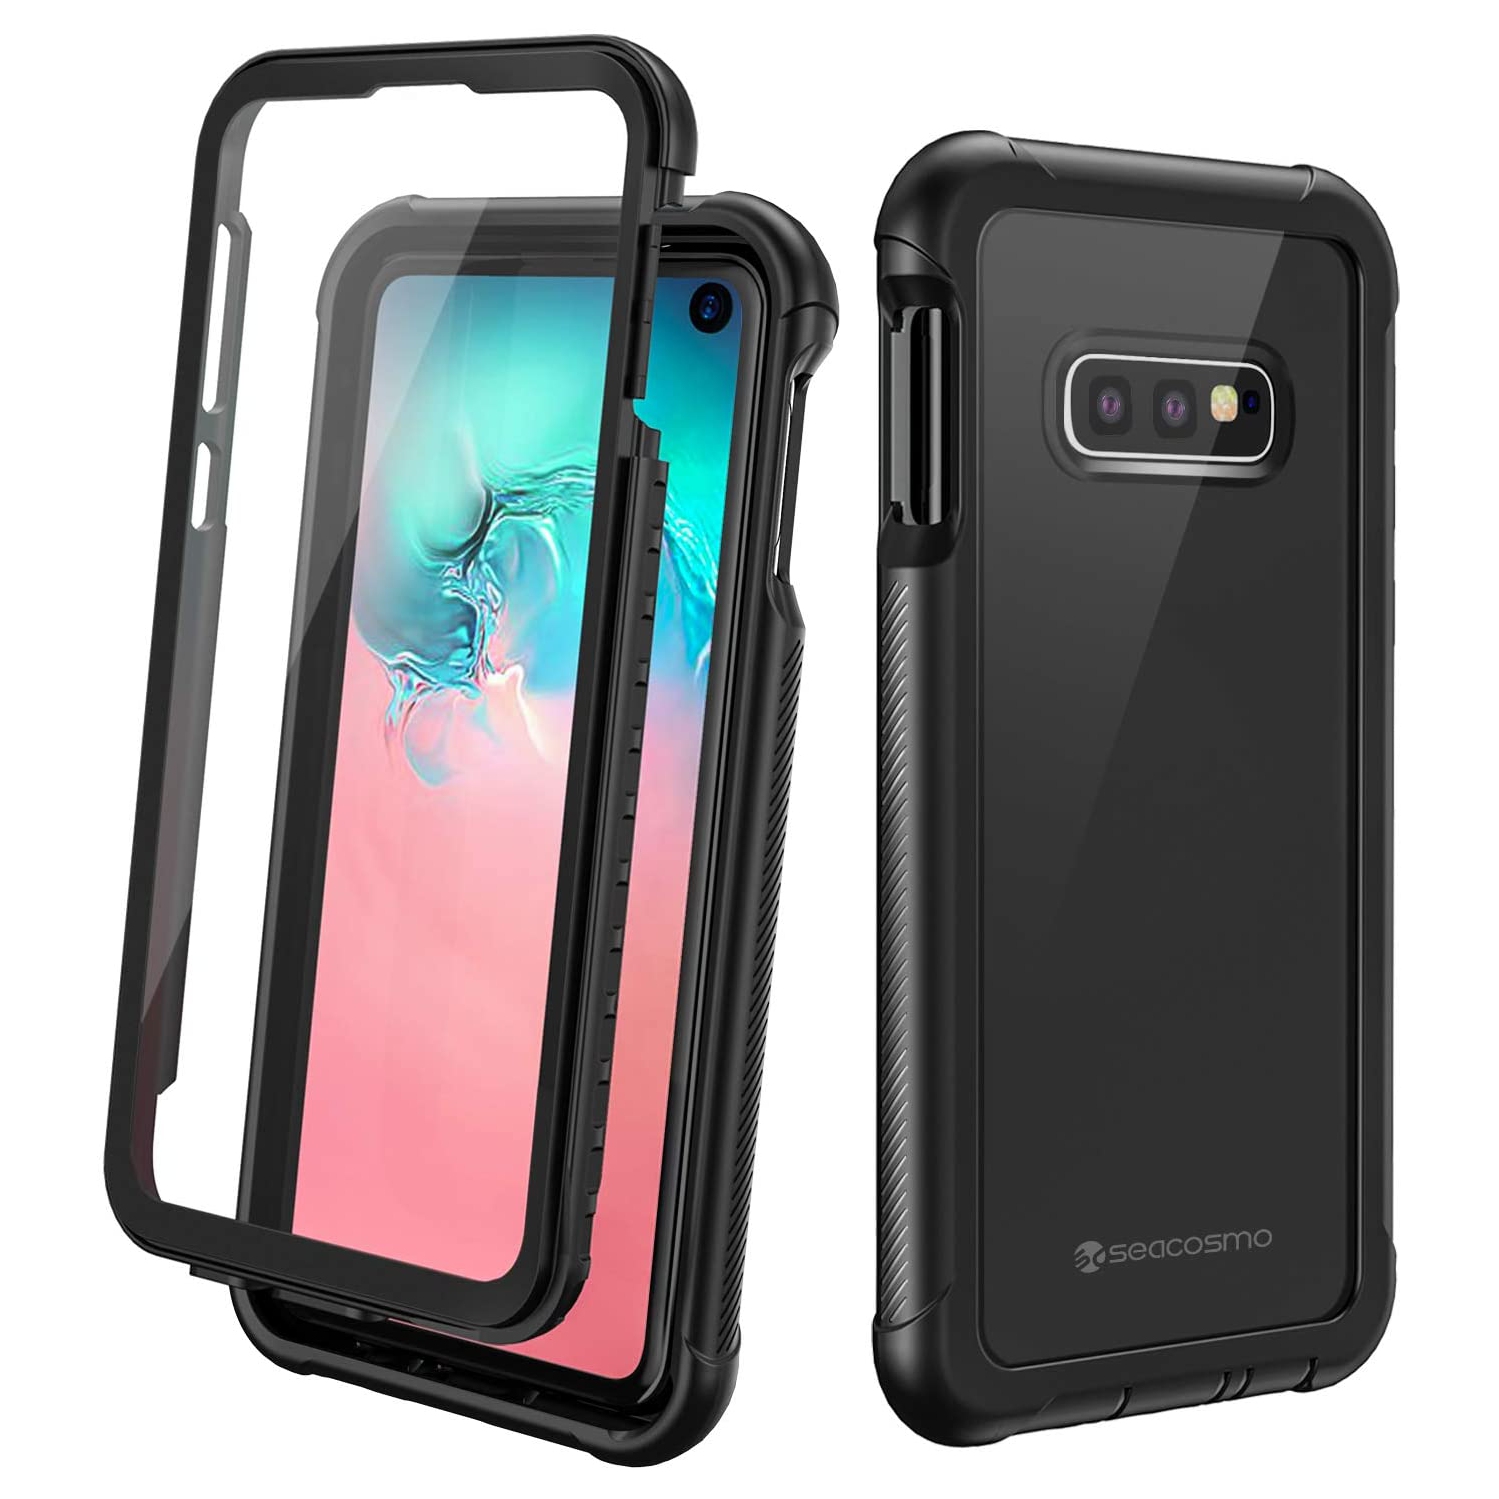 Galaxy S10e Case, [Built-in Screen Protector] Full Body Clear BumCooper Case Shockproof Protective Phone Cases